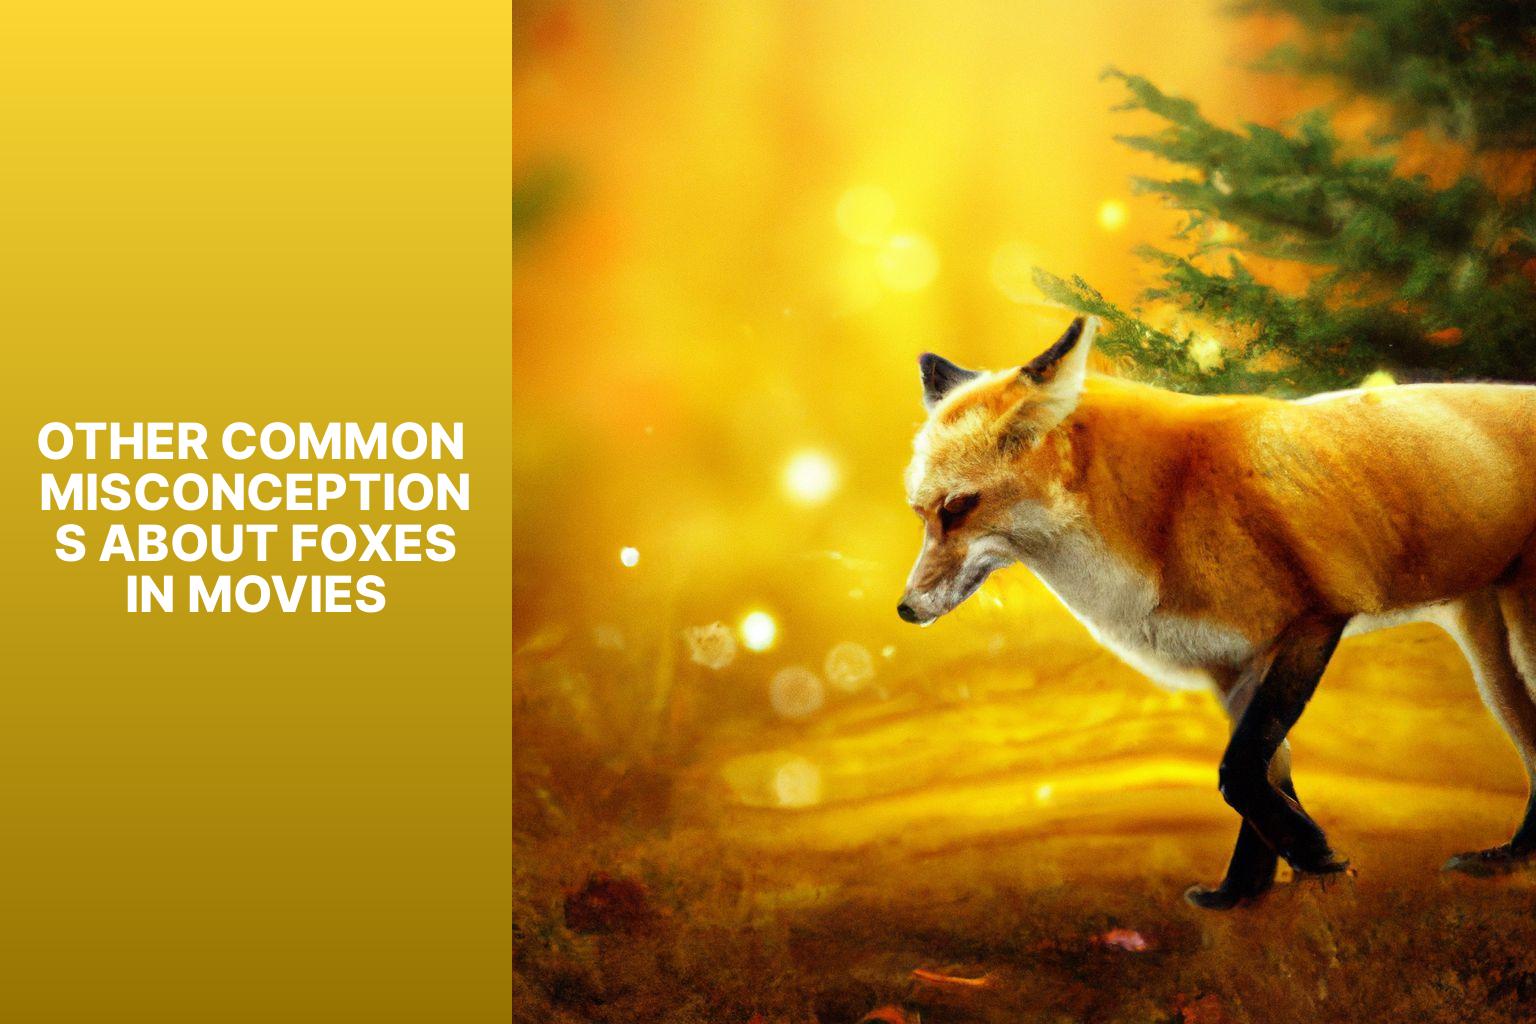 Other Common Misconceptions about Foxes in Movies - Fox Myths in Movies 